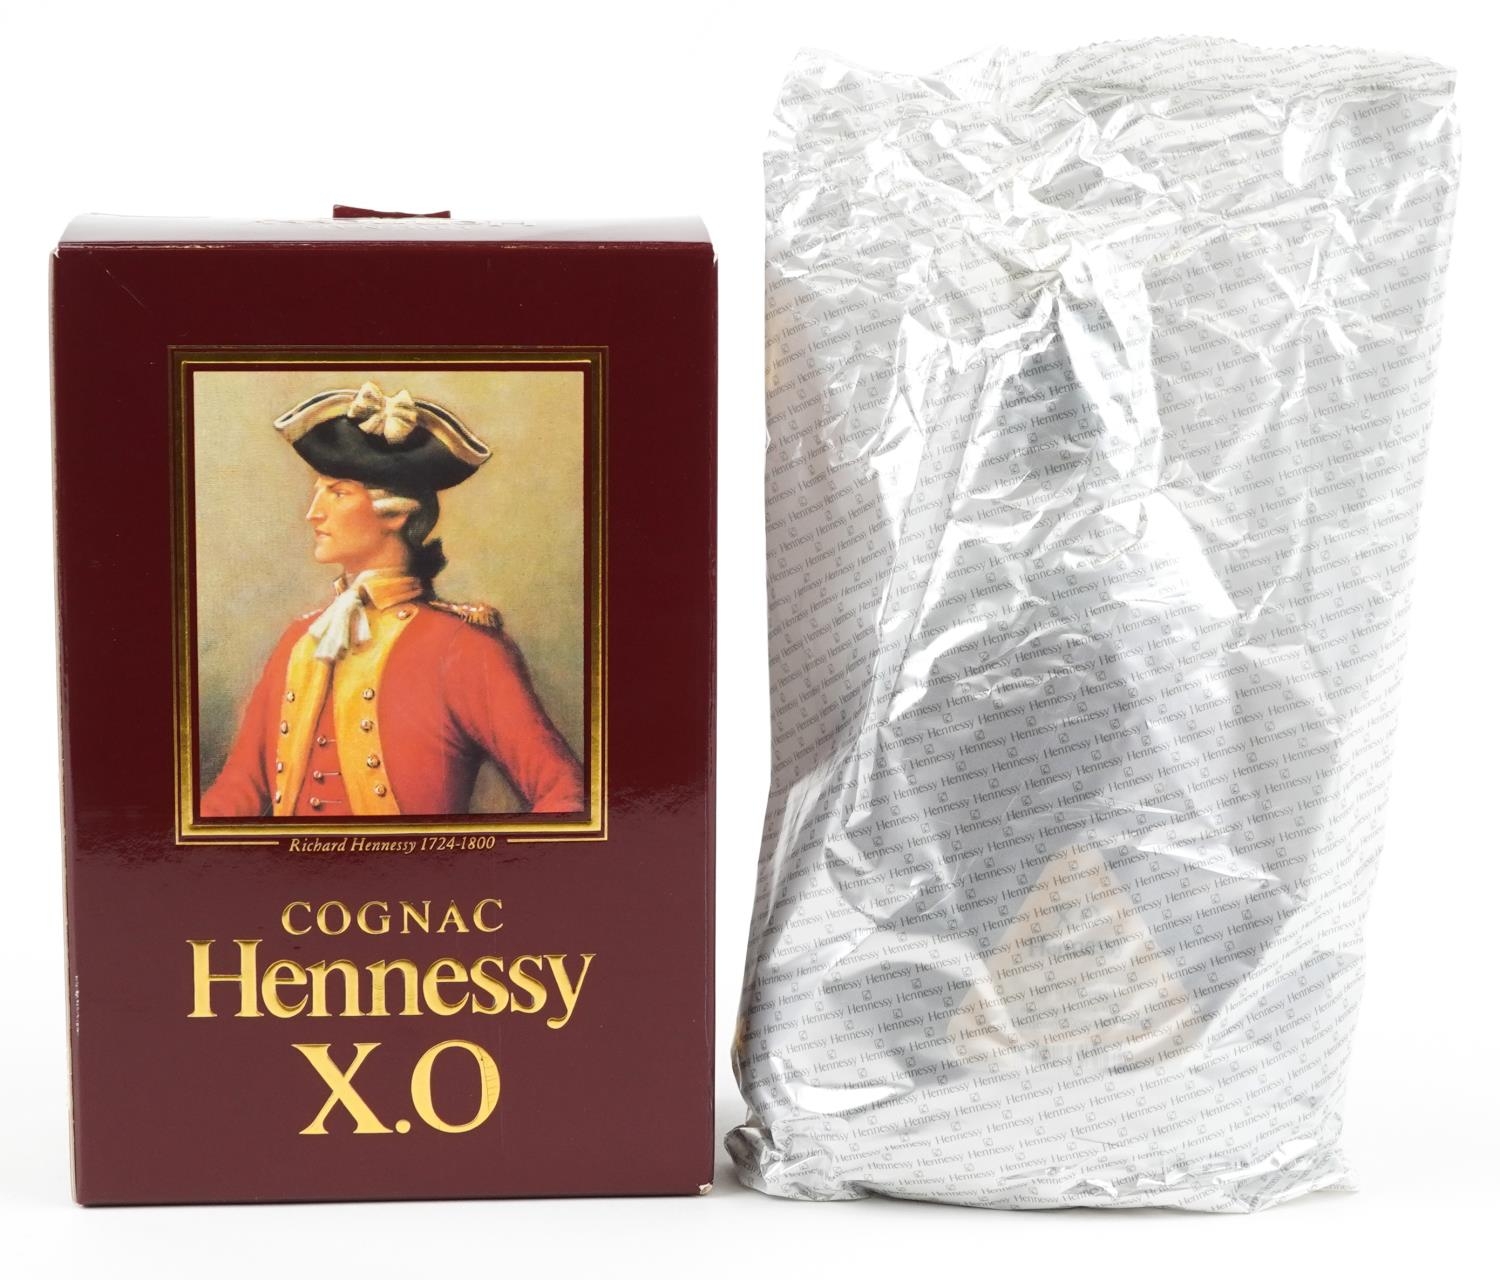 Bottle of Hennessey XO cognac with box housed in a sealed bag